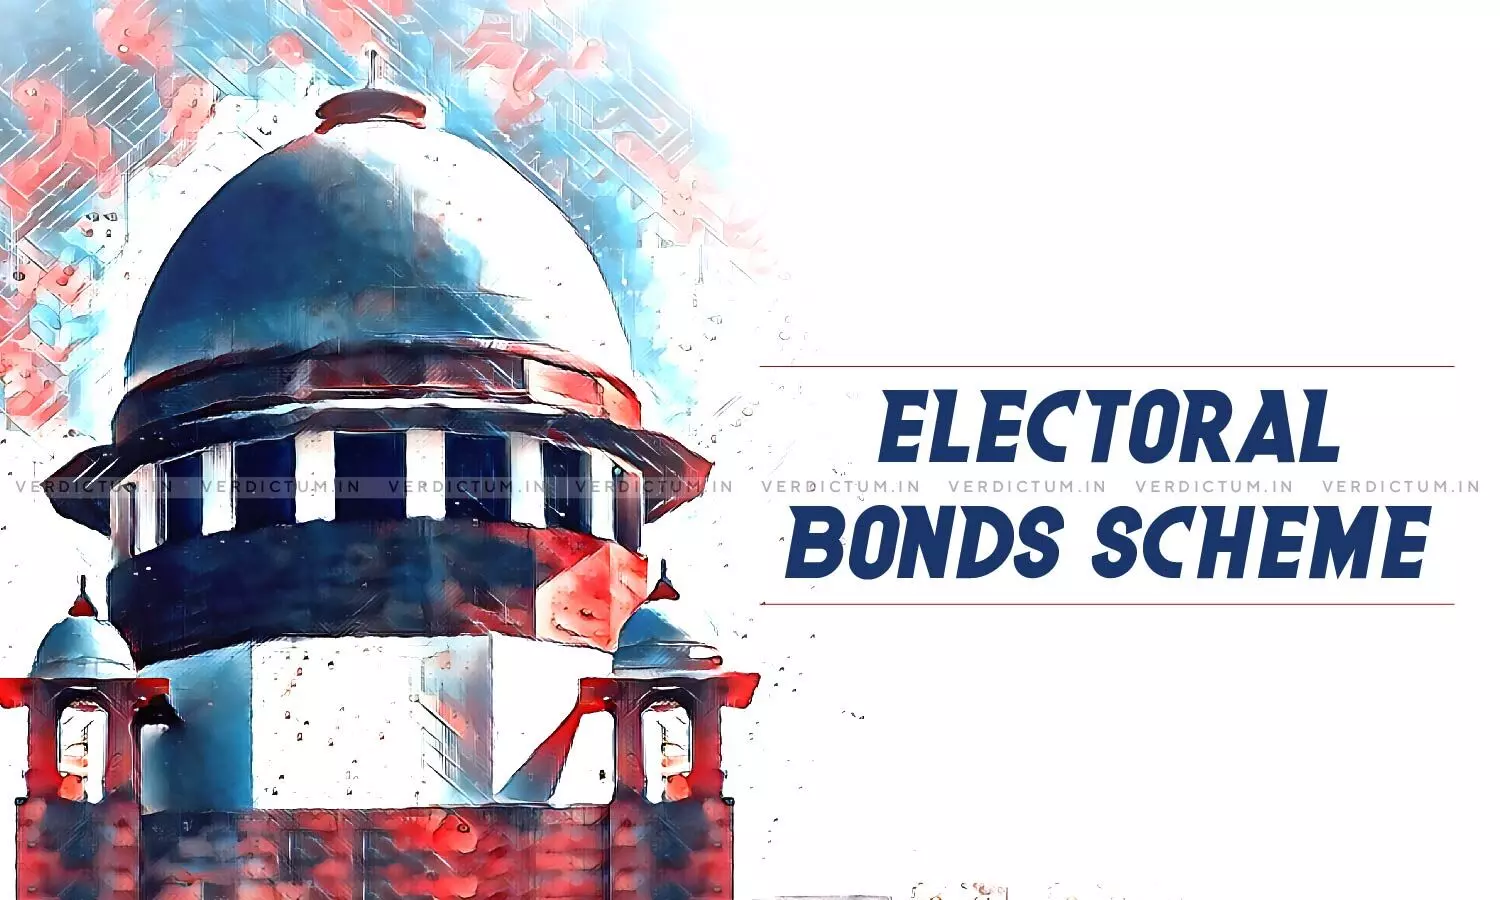 May Constitute One Of Indias Largest Scams: Plea In Apex Court Seeks SIT Probe Into Electoral Bonds Scheme